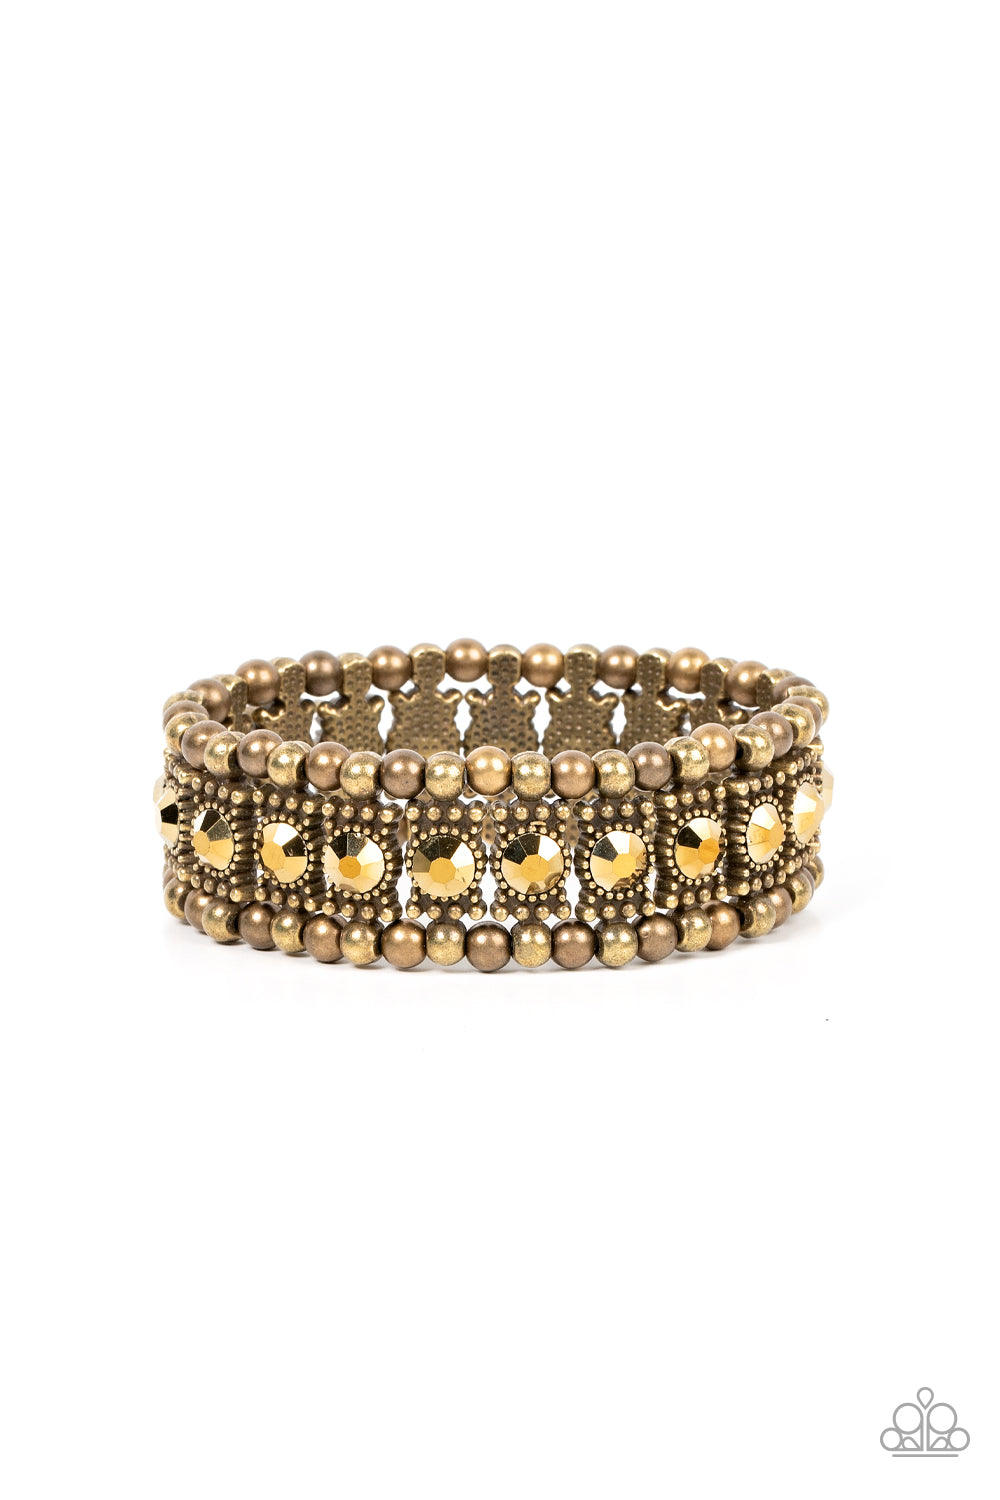 Ritzy Reboot Brass Bracelet - Paparazzi Accessories  A dazzling row of gritty aurum rhinestones set in dotted frames is bordered by a row of dainty antiqued brass studs. Rustic brass beads form the outermost border of this luxuriously layered design, which is threaded along stretchy bands for an upscale edgy look.  Sold as one individual bracelet.